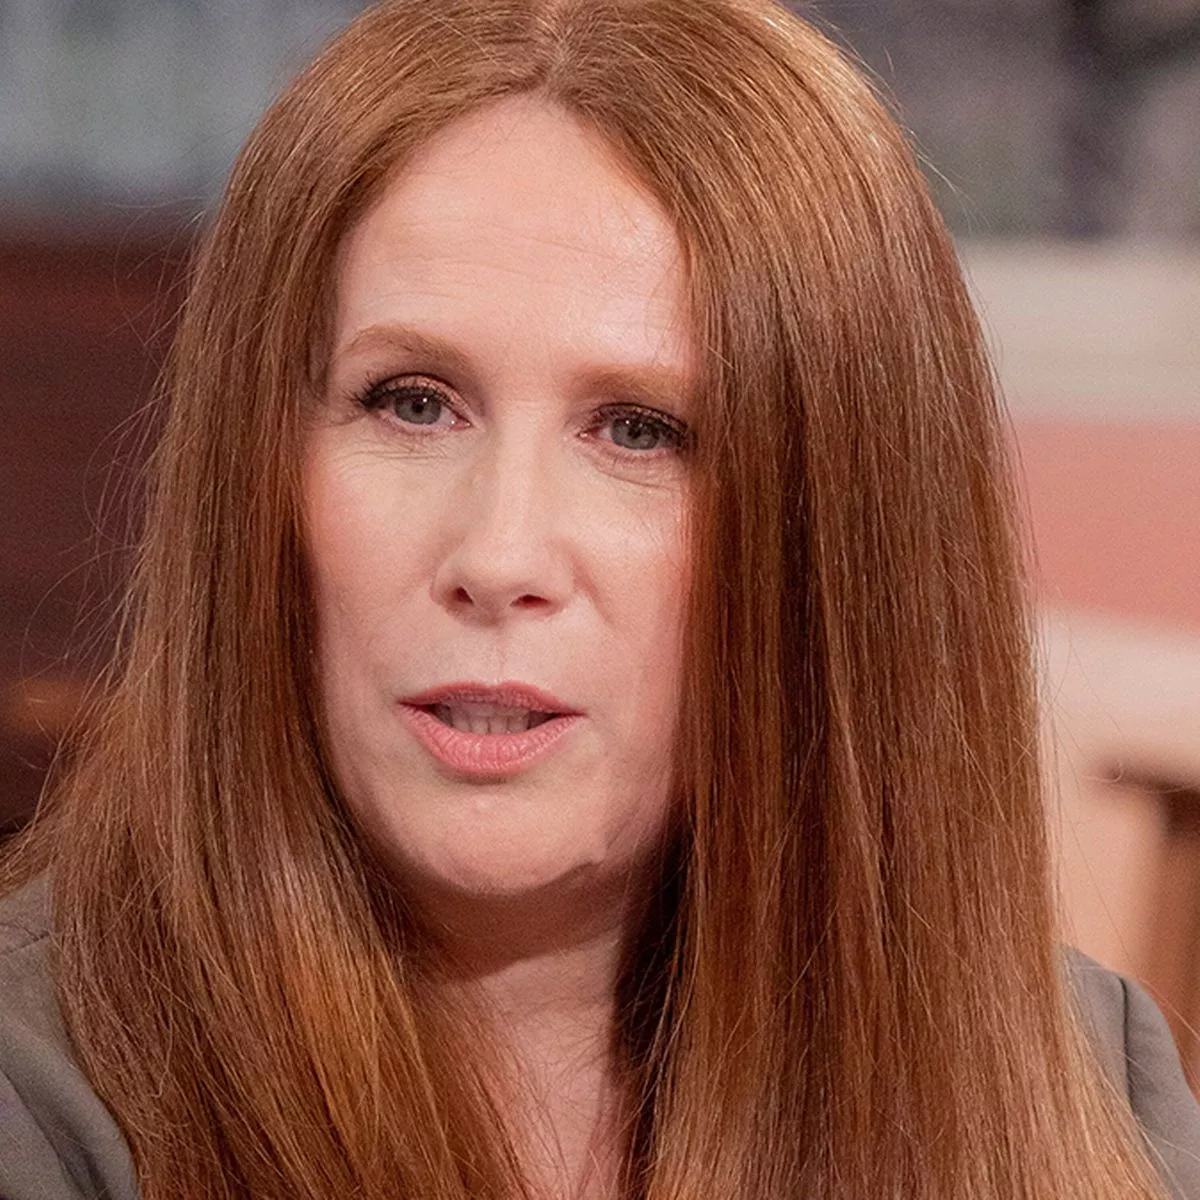 belinda human recommends catherine tate hot pic